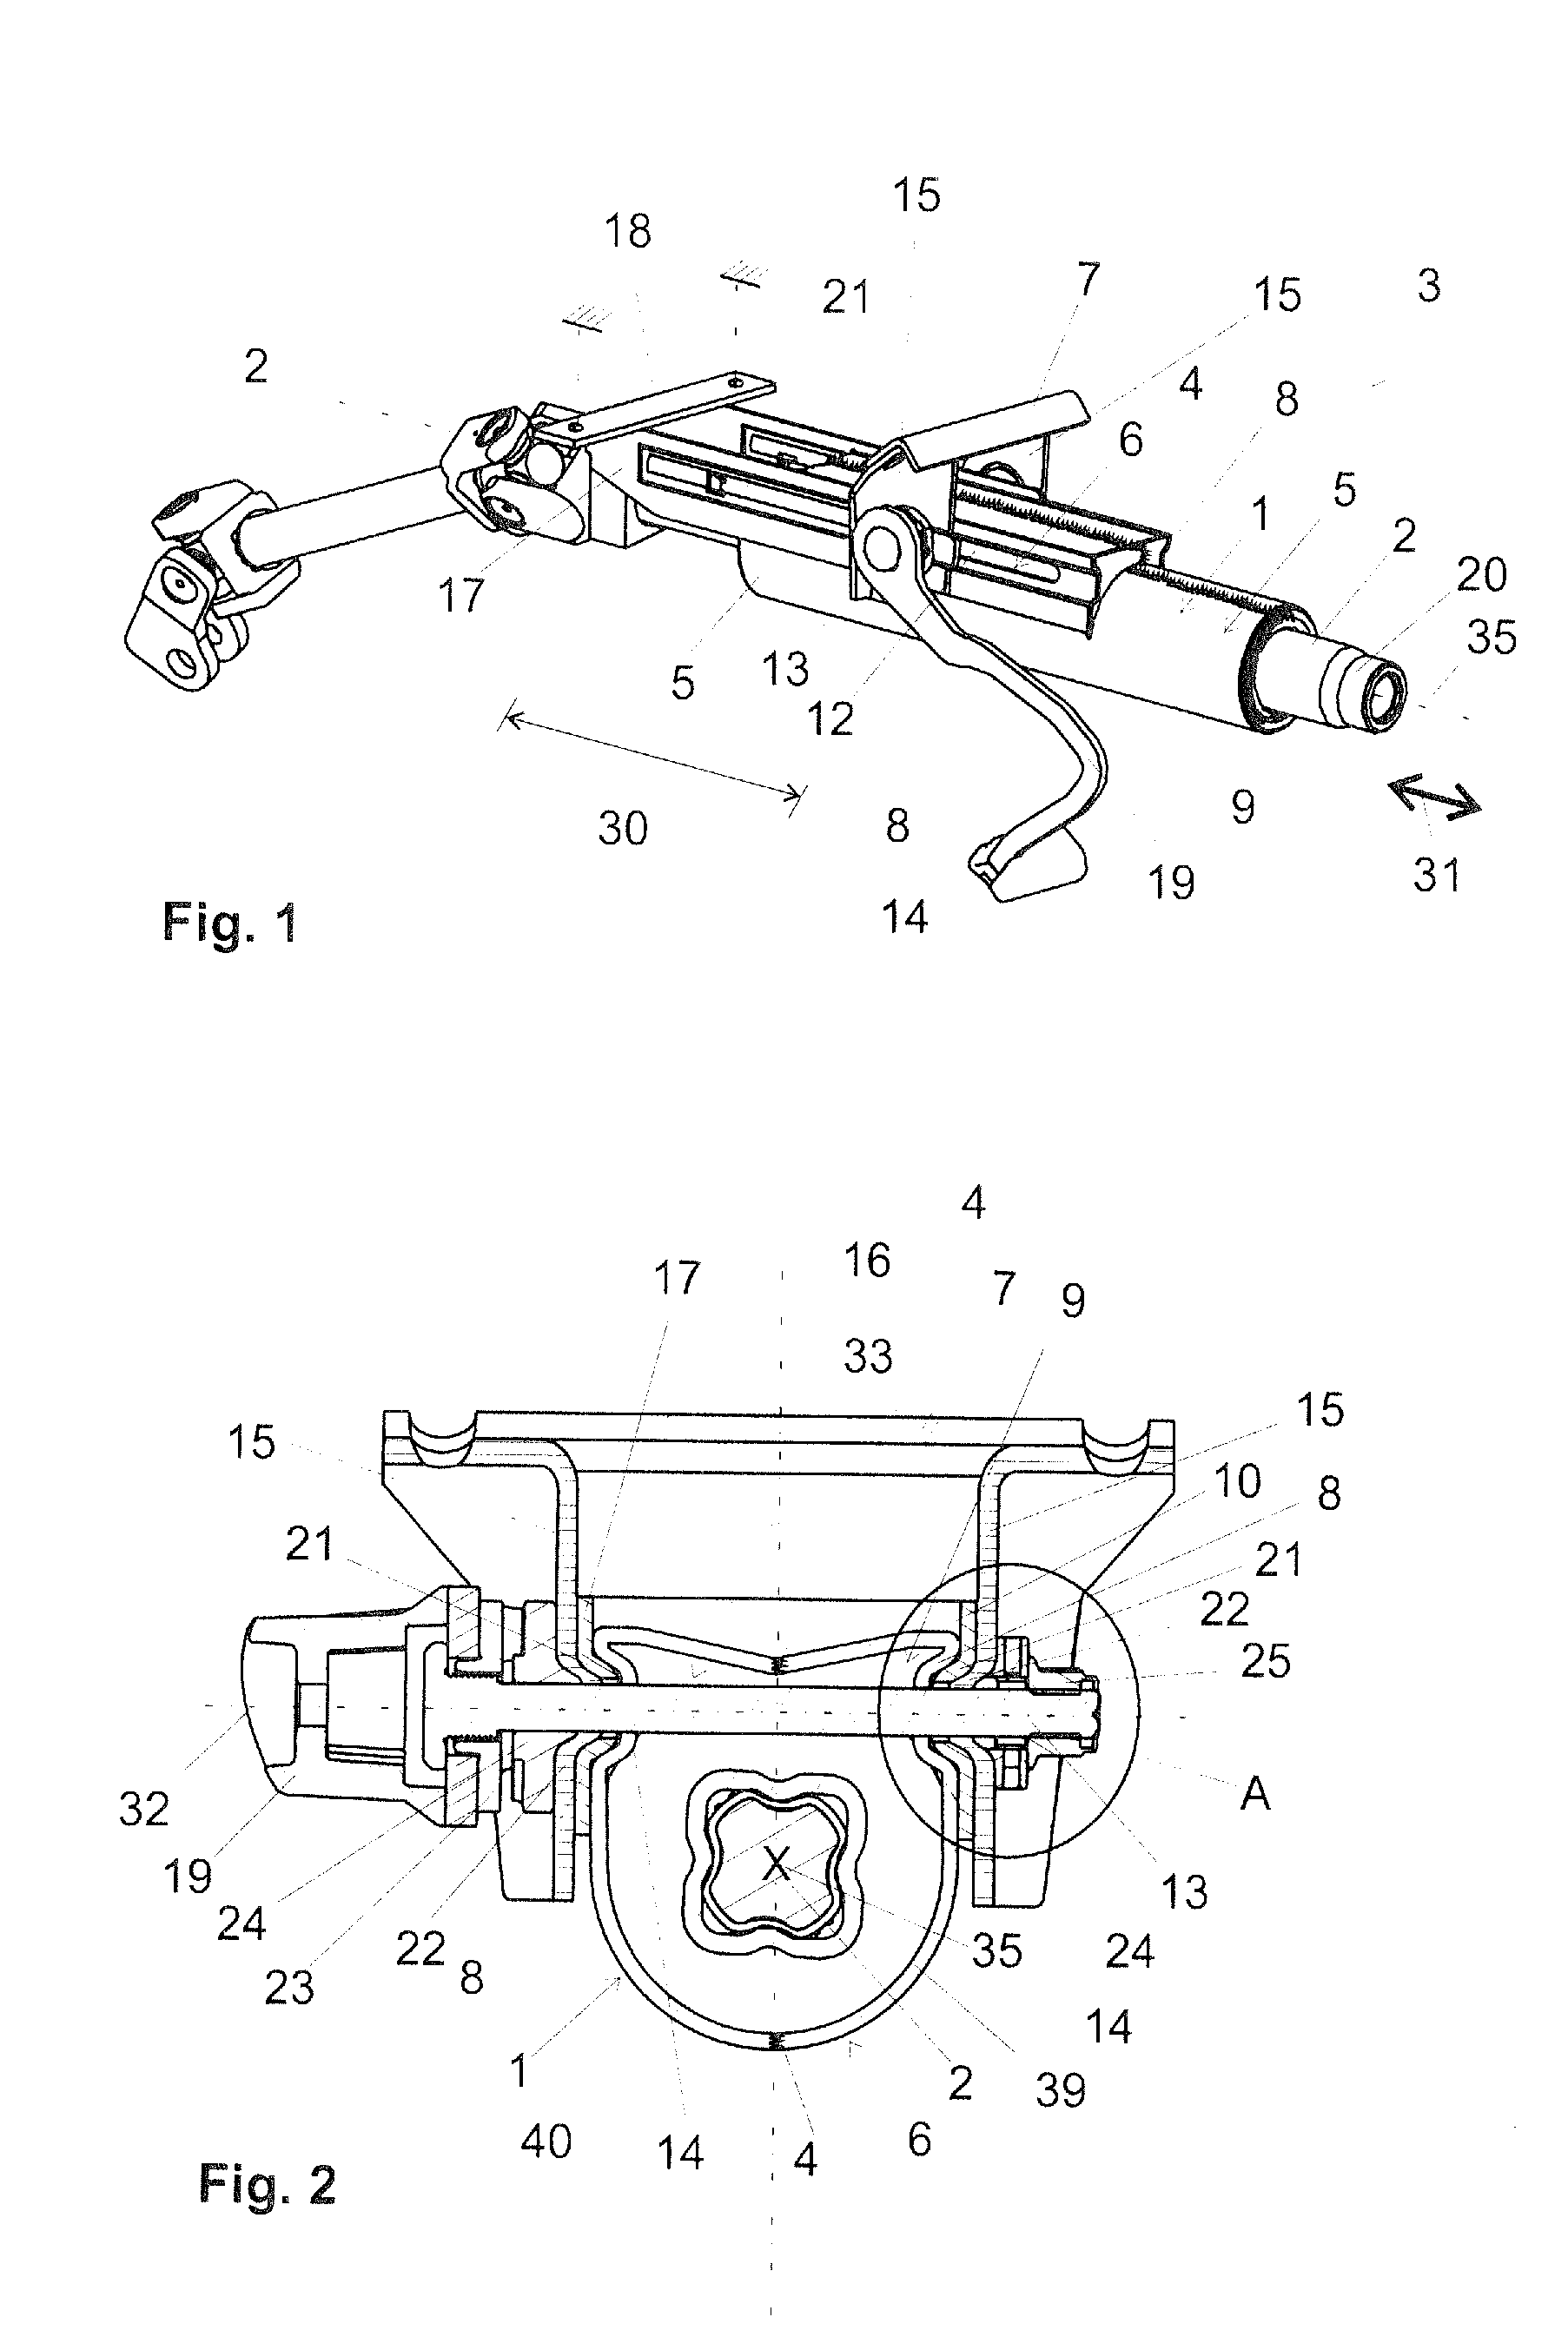 Steering shaft bearing unit for rotatably mounting a steering shaft